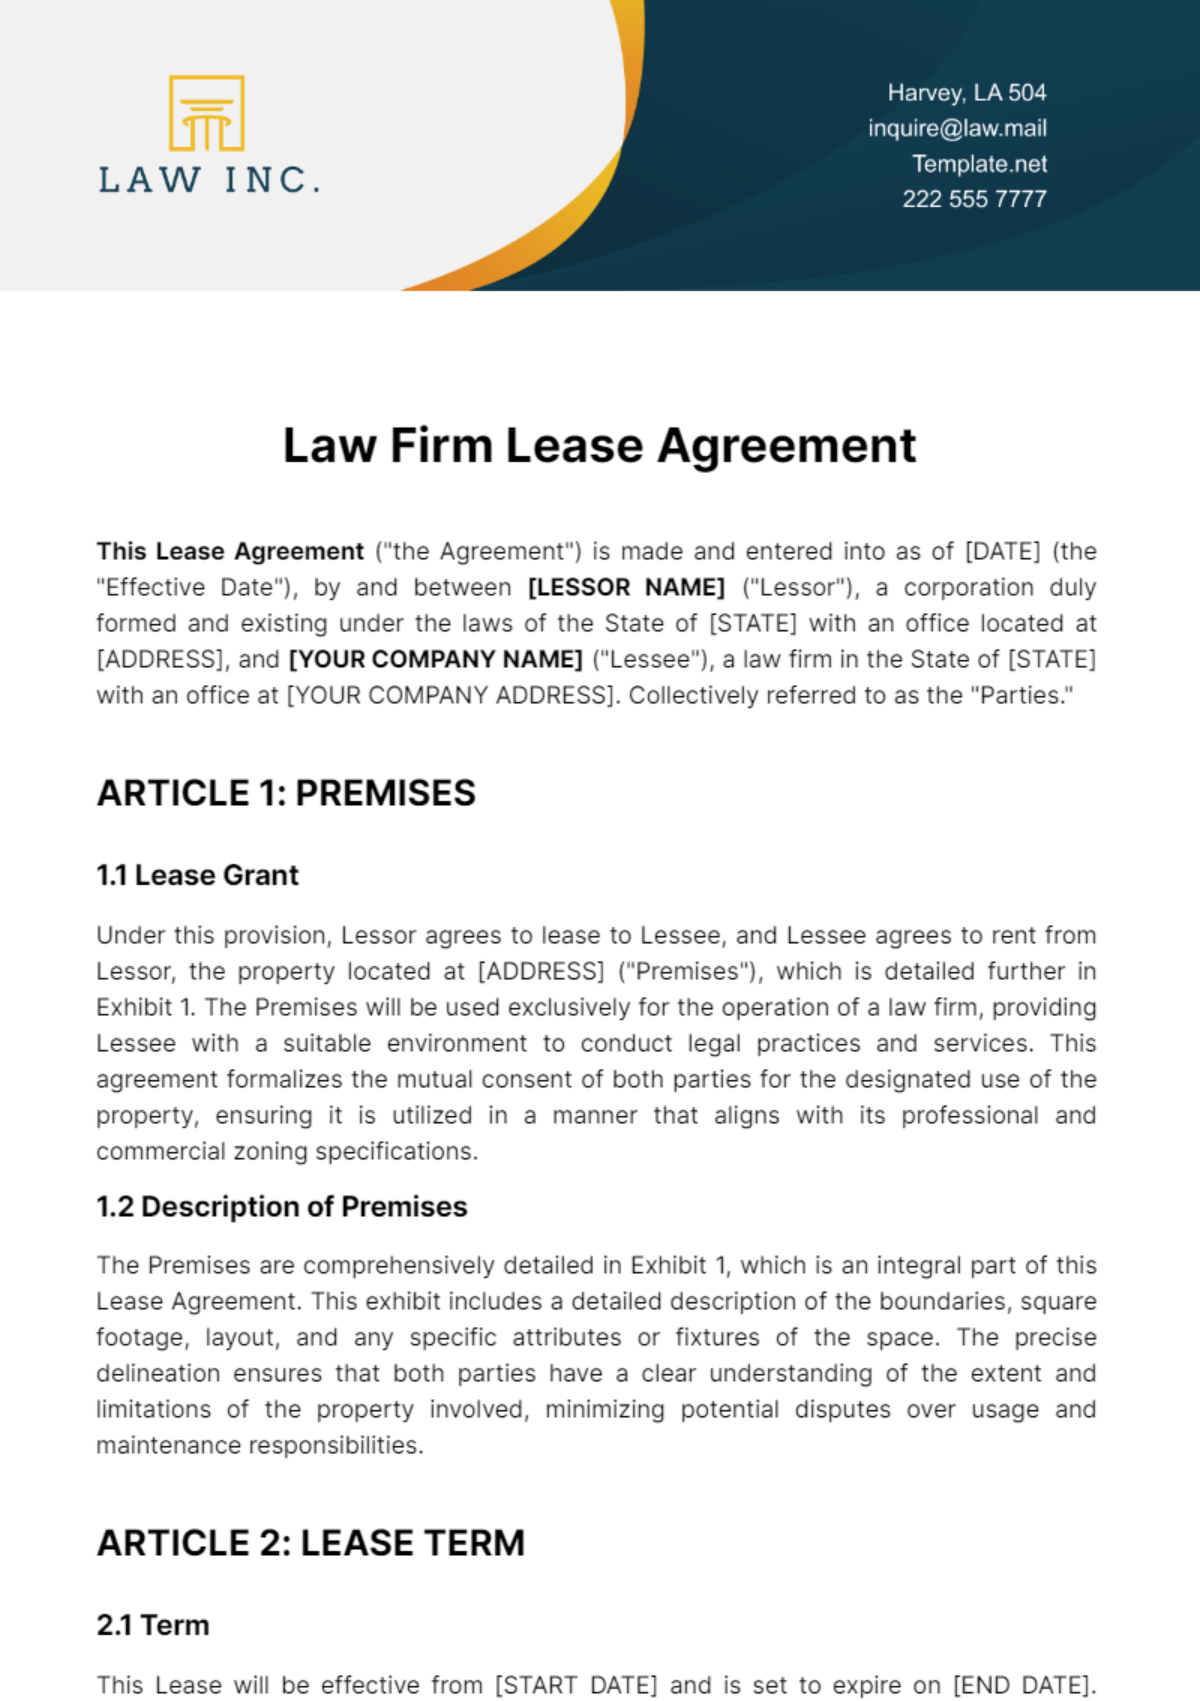 Free Law Firm Lease Agreement Template